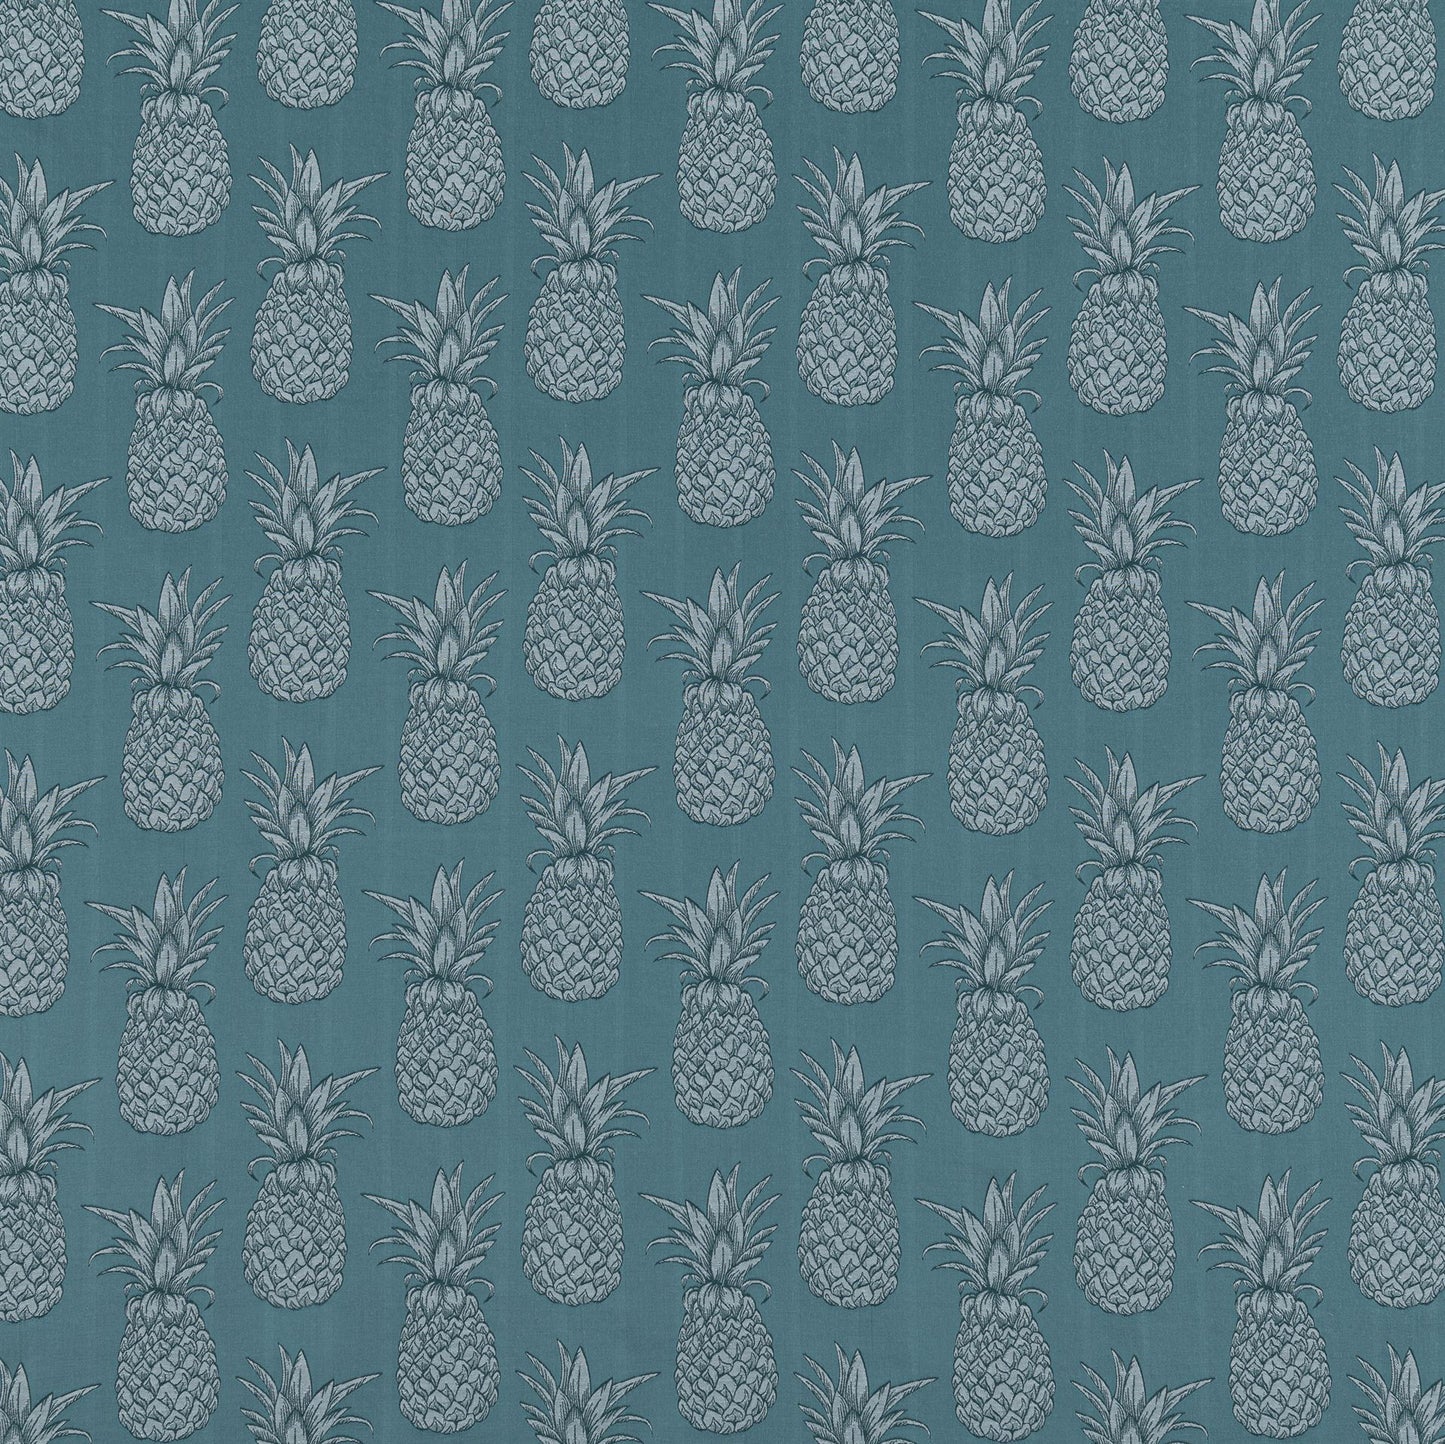 Beaumont Textiles Ananas Teal